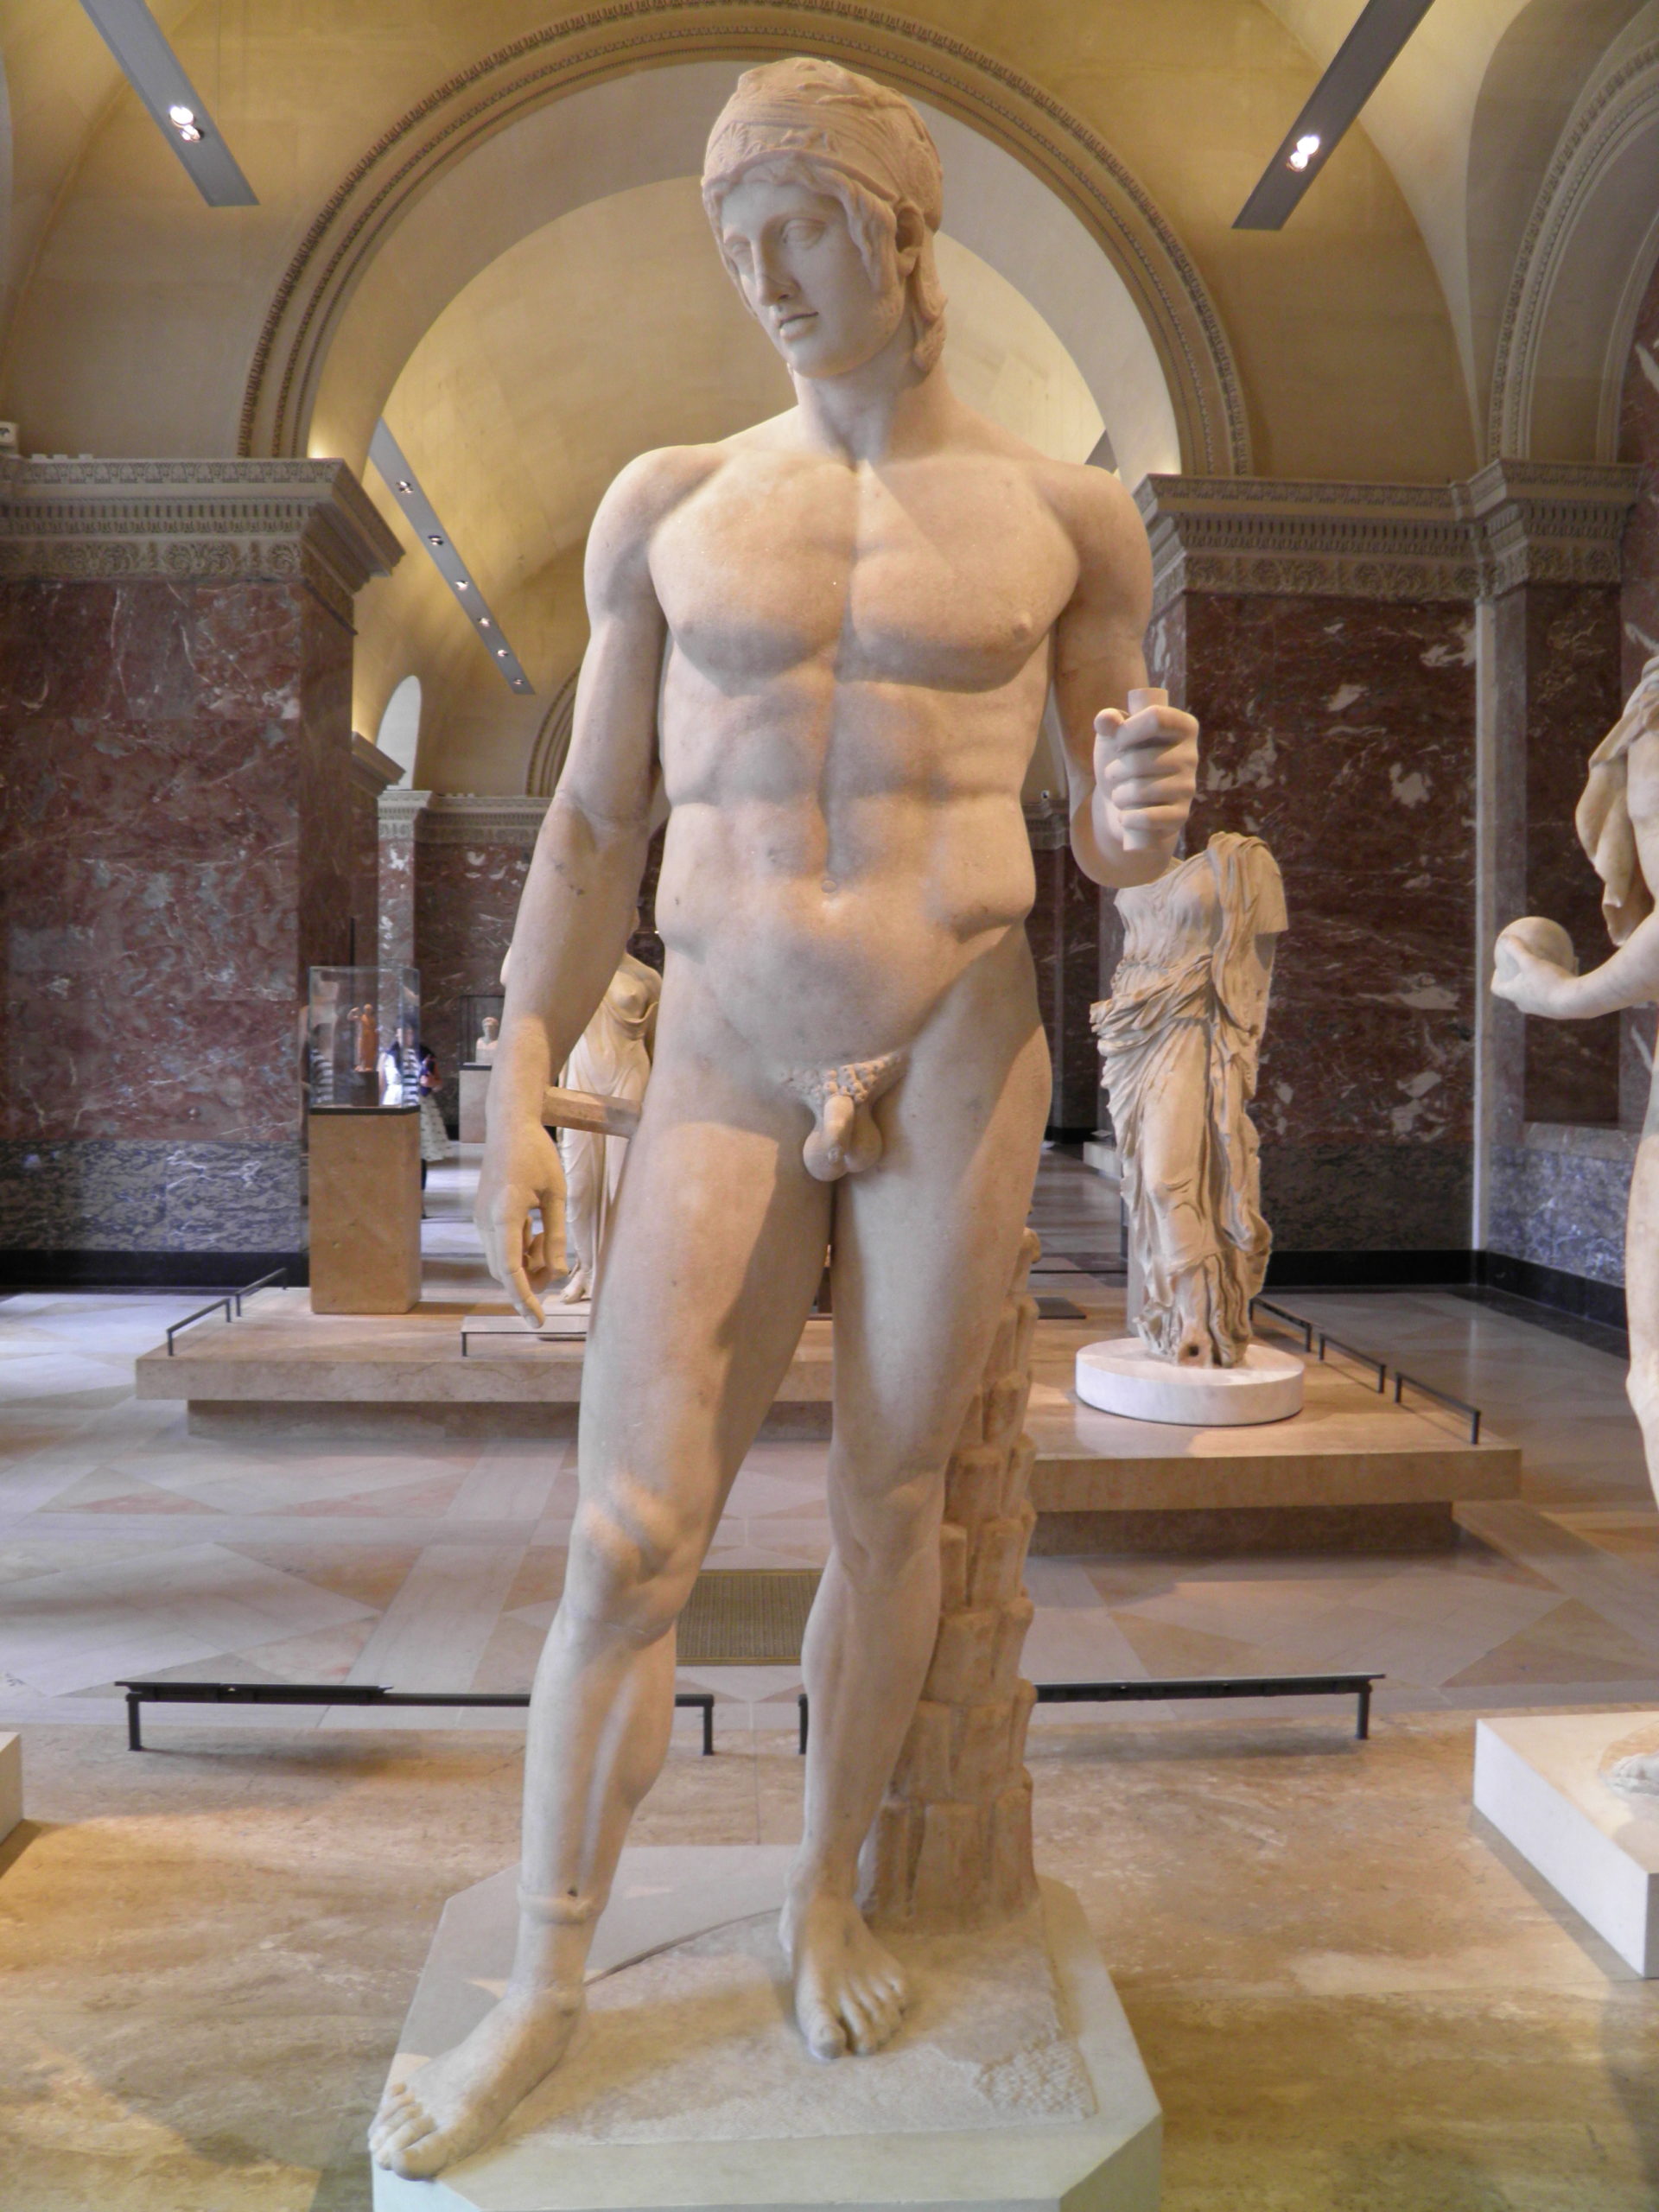 Mars standing in the nude. He is wearing a helmet, and on his right ankle is an ankle bracelet.